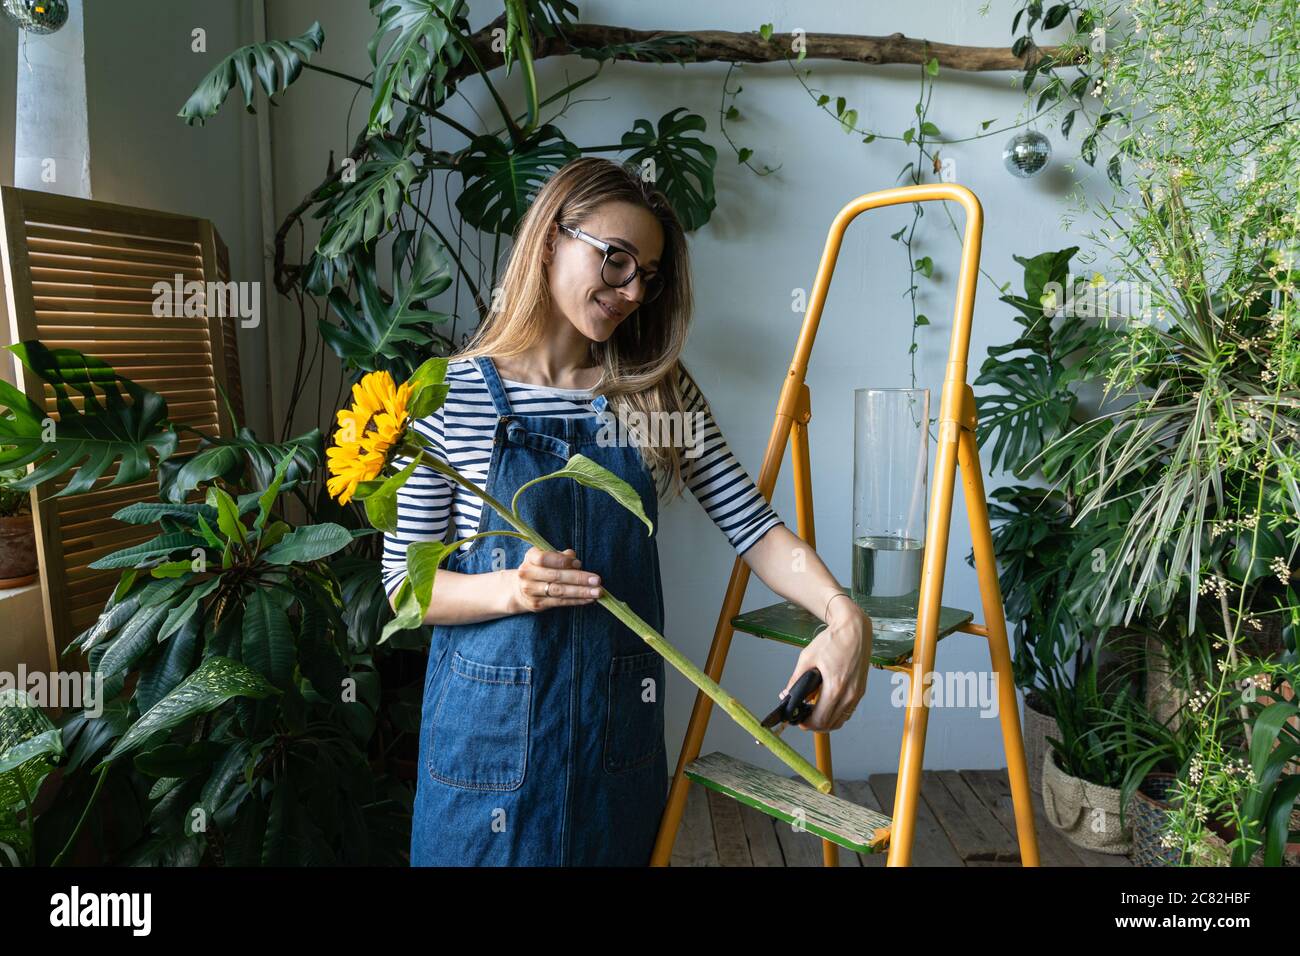 Small business. Florist woman surrounded by tropical plants cutting the stem of yellow sunflower using secateurs, standing near the orange stepladder. Stock Photo